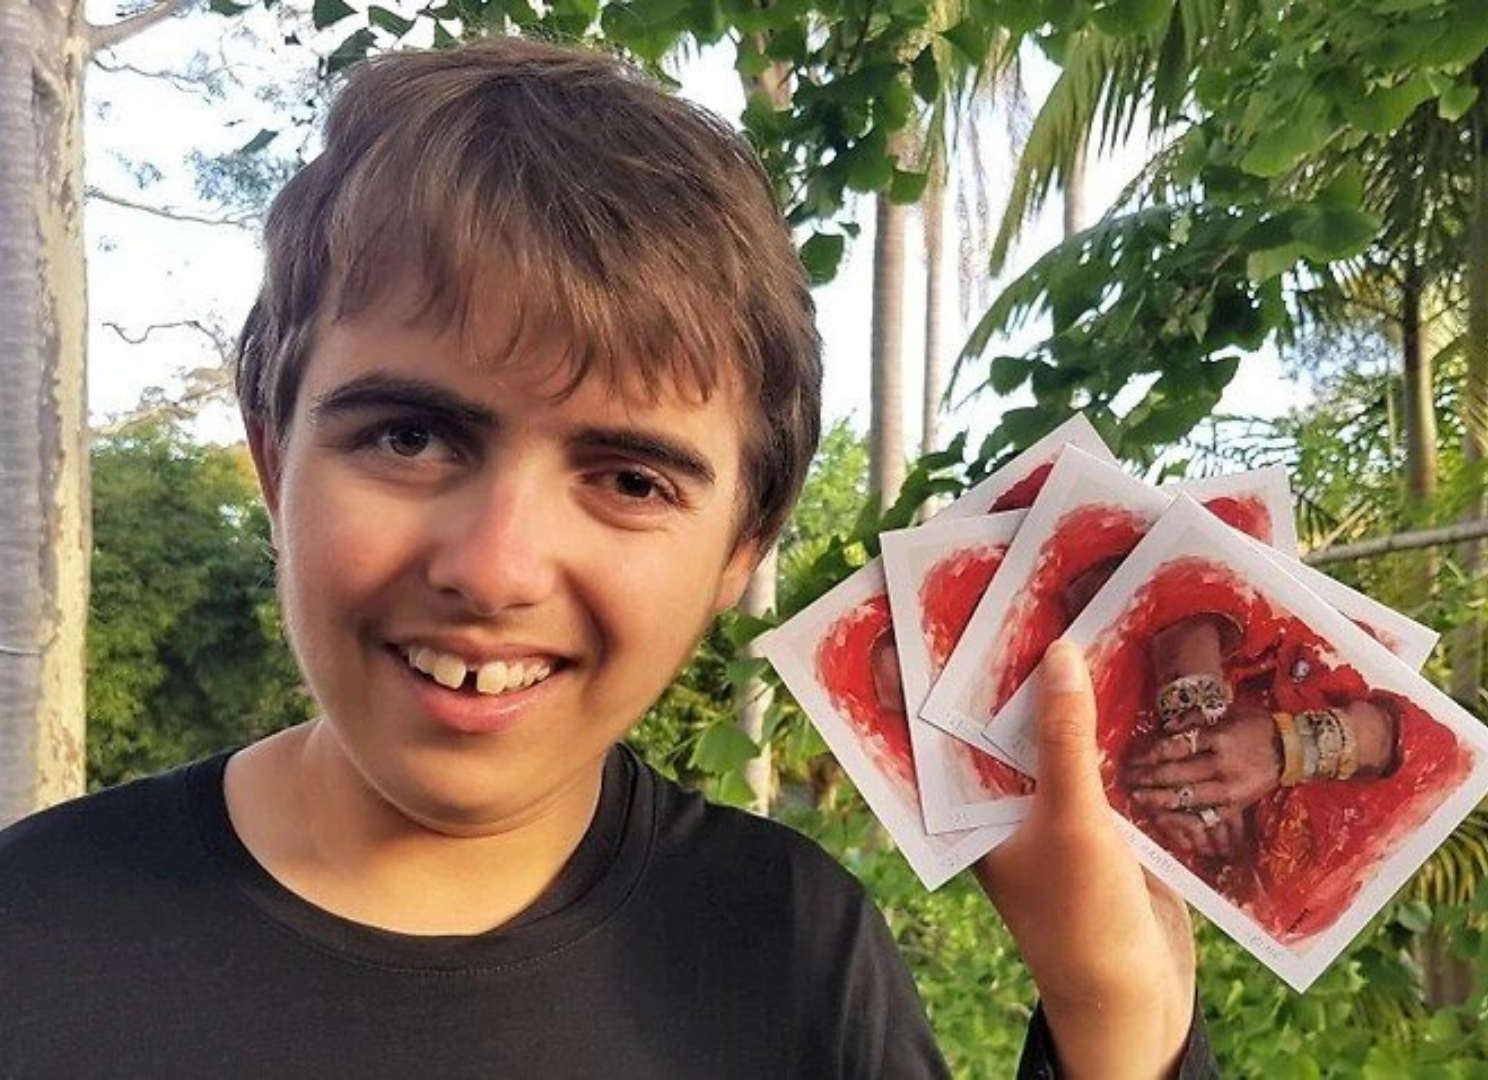 A photo of Luca holding 4 red Afghanistan fundraising cards in his left hand. He is wearing a dark shirt and is smiling at the camera, and is in front of some leafy trees.